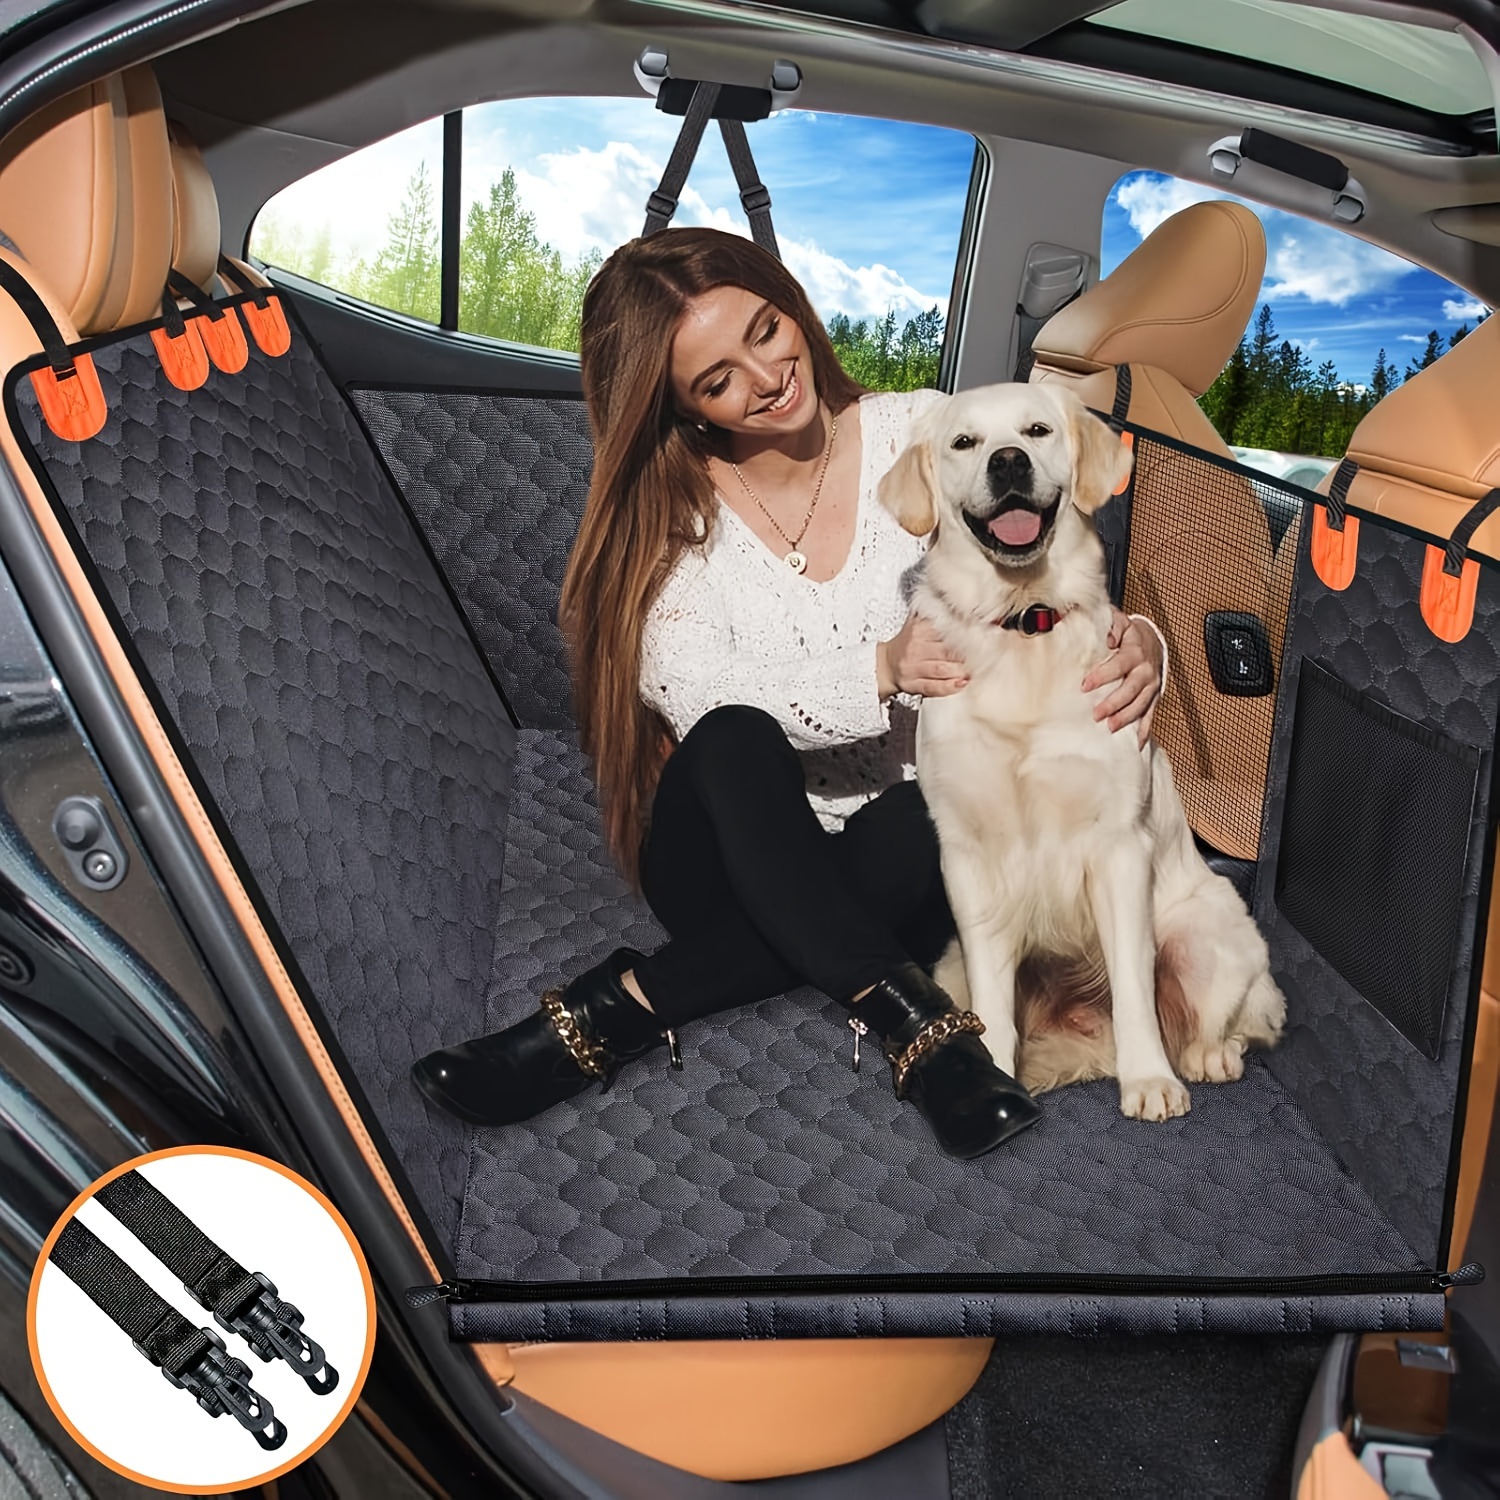 

1pc, Oversized Polyester Car Seat Cover, Portable Folding Pet Bed, Dog Hammock Backseat Extender, Fits Most Cars, Suvs & Trucks, Durable, Waterproof, Pet Travel Accessories